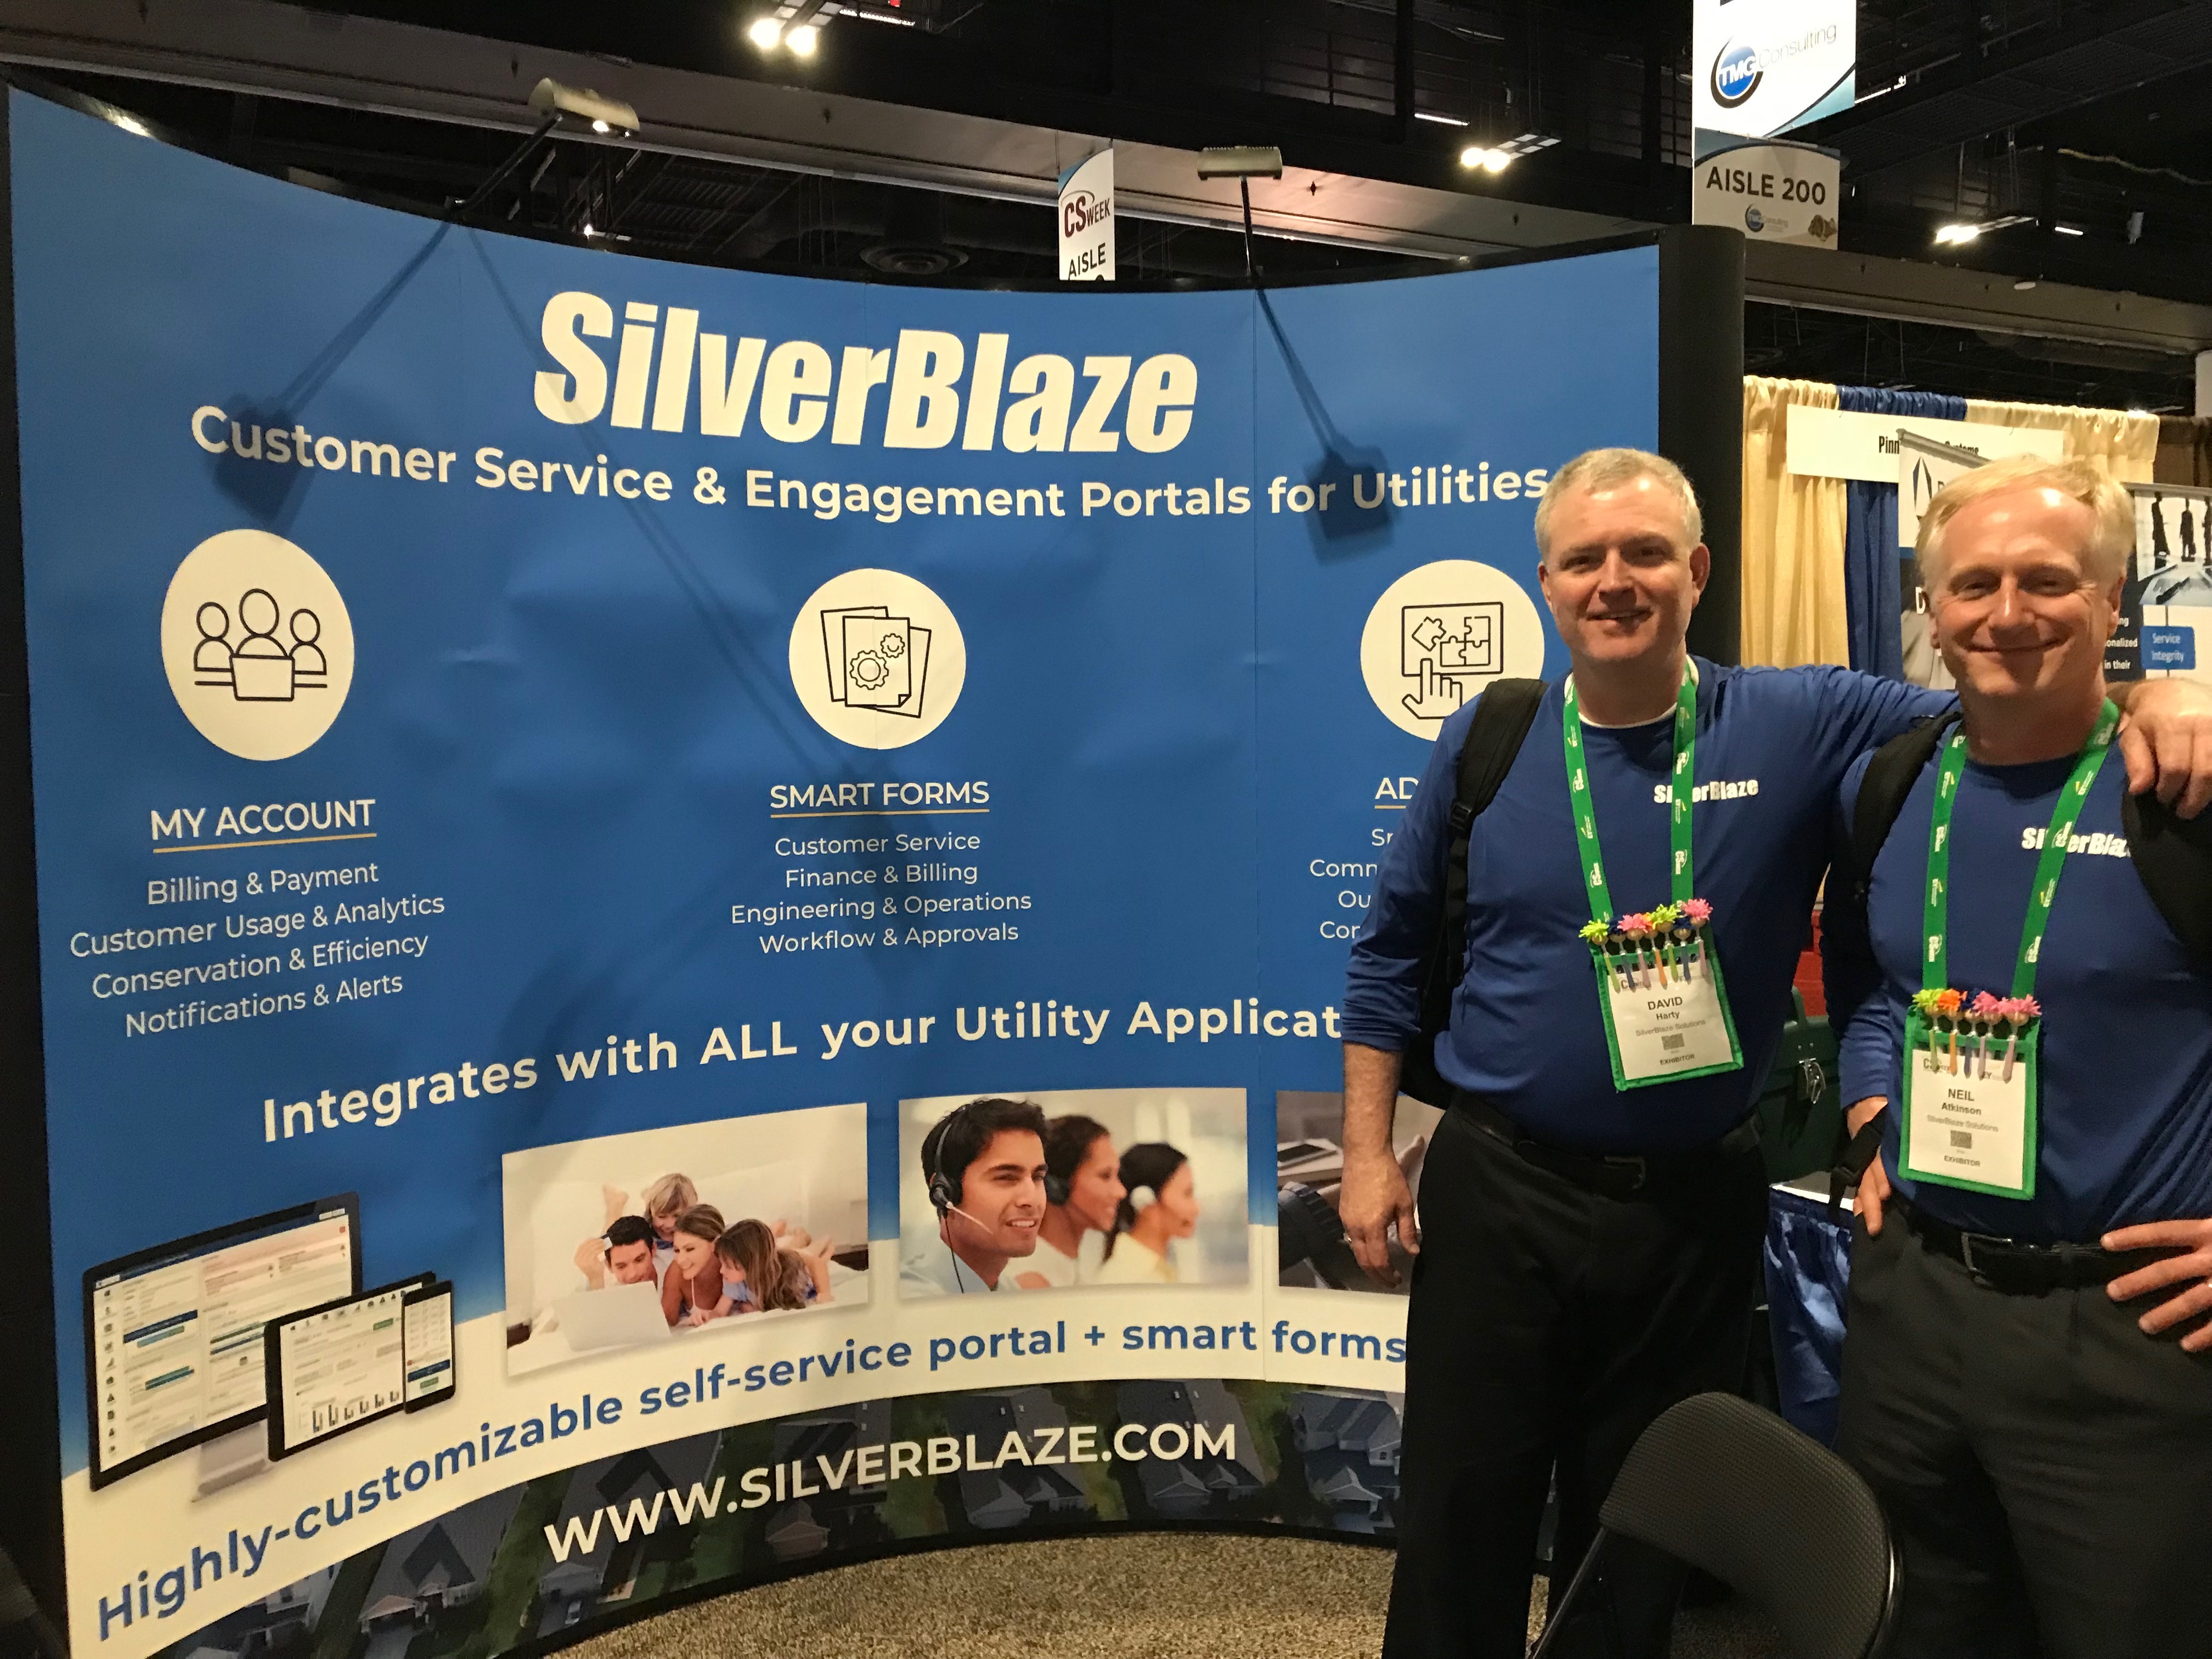 The silverBlaze stand